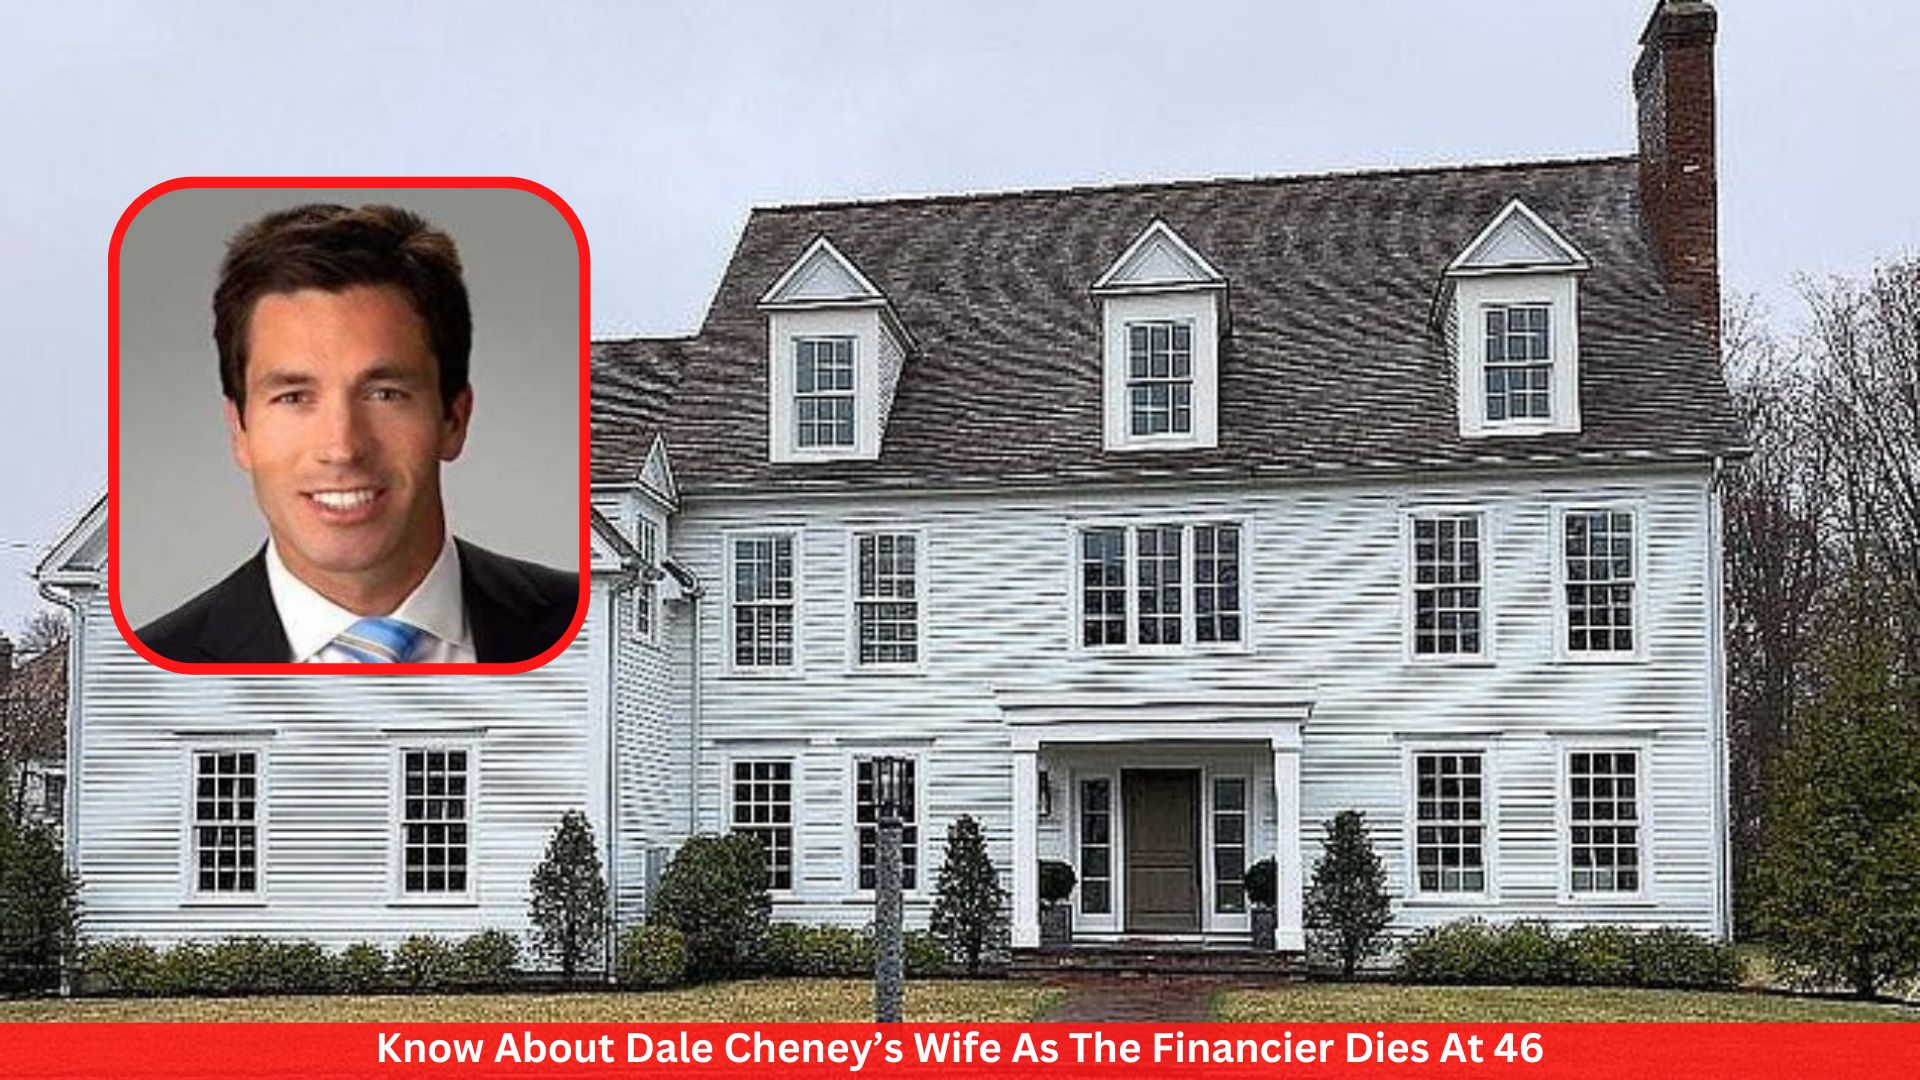 Know About Dale Cheney’s Wife As The Financier Dies At 46